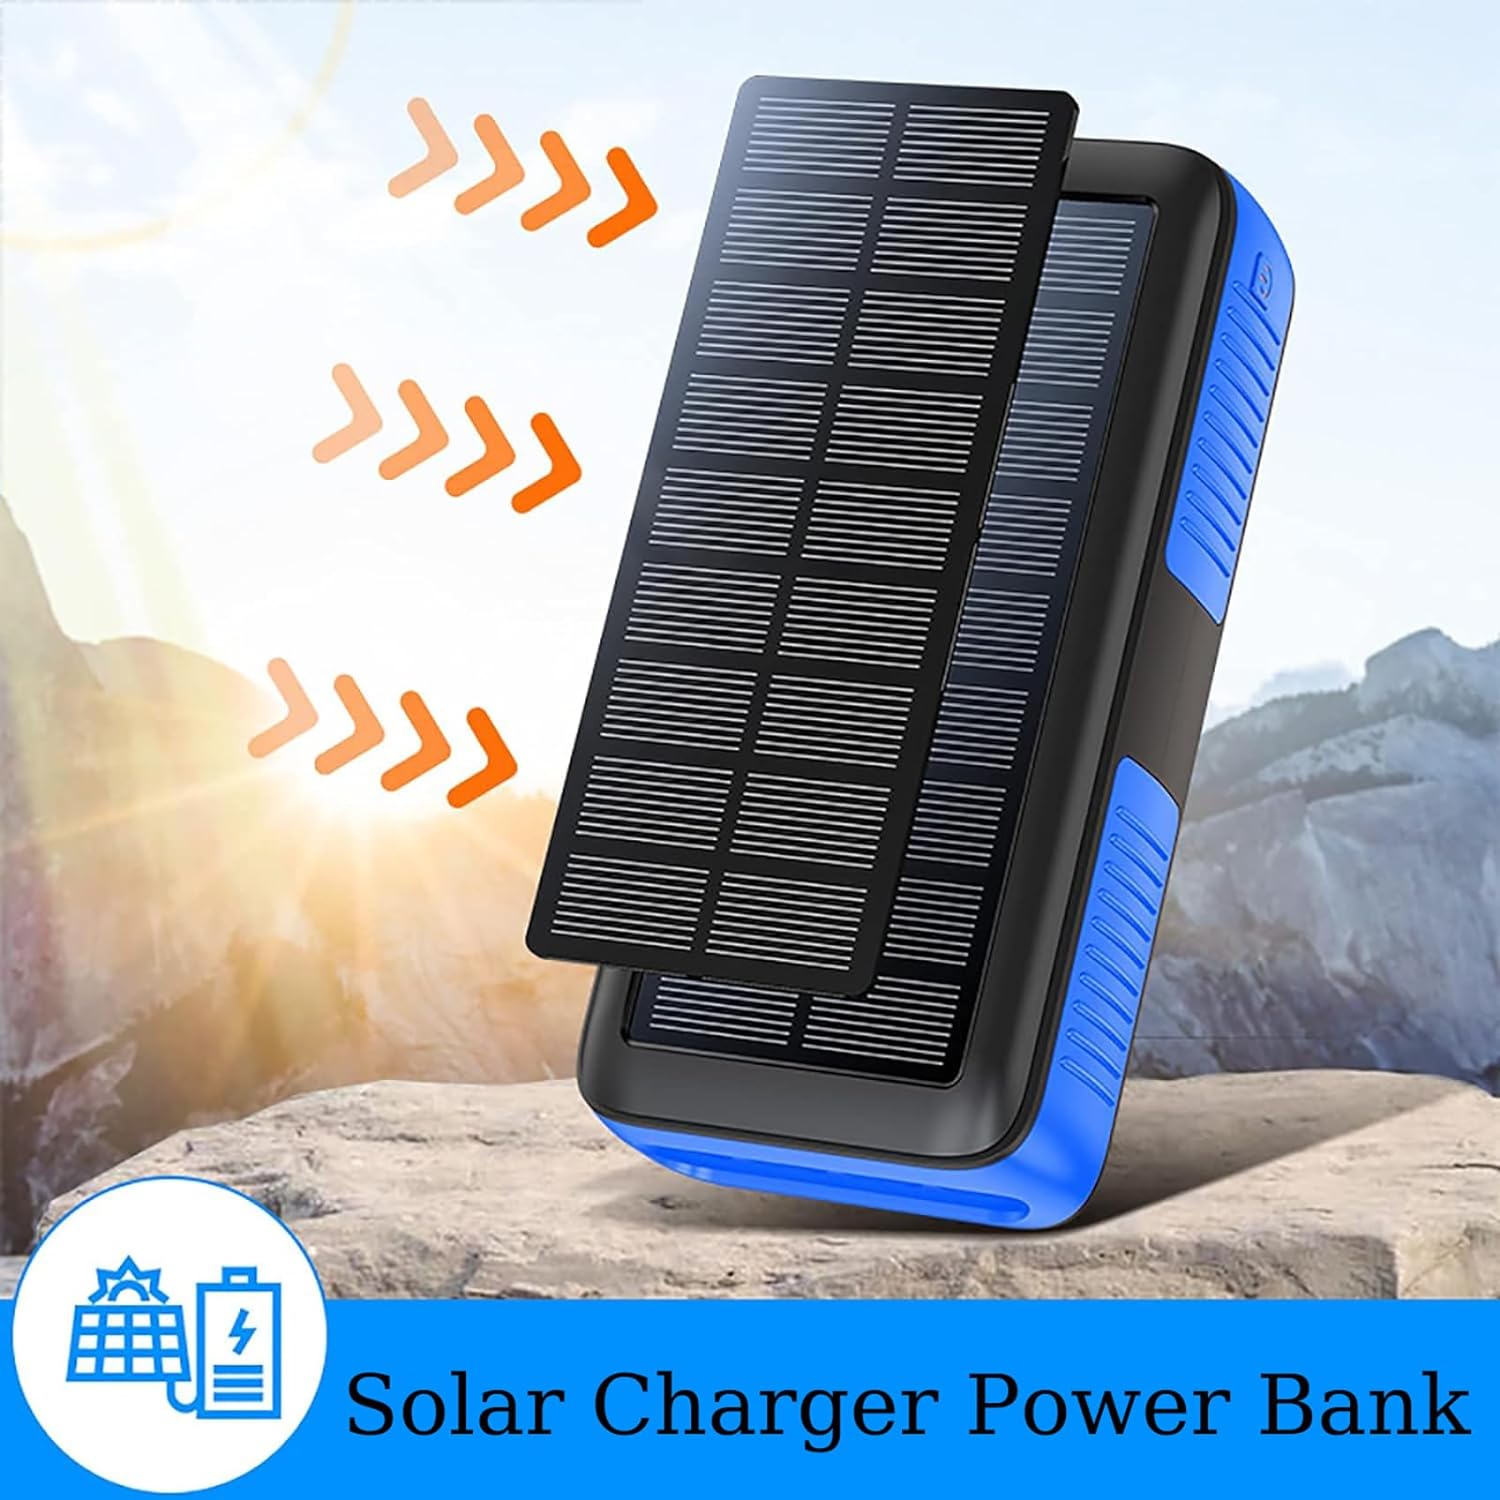 Solar Power Bank Charger 63200Mah Hand Crank Fast Charging Power Bank Outputs Inputs Solar Portable Charger 4 Flashlights for Camping Gear Accessories Essentials